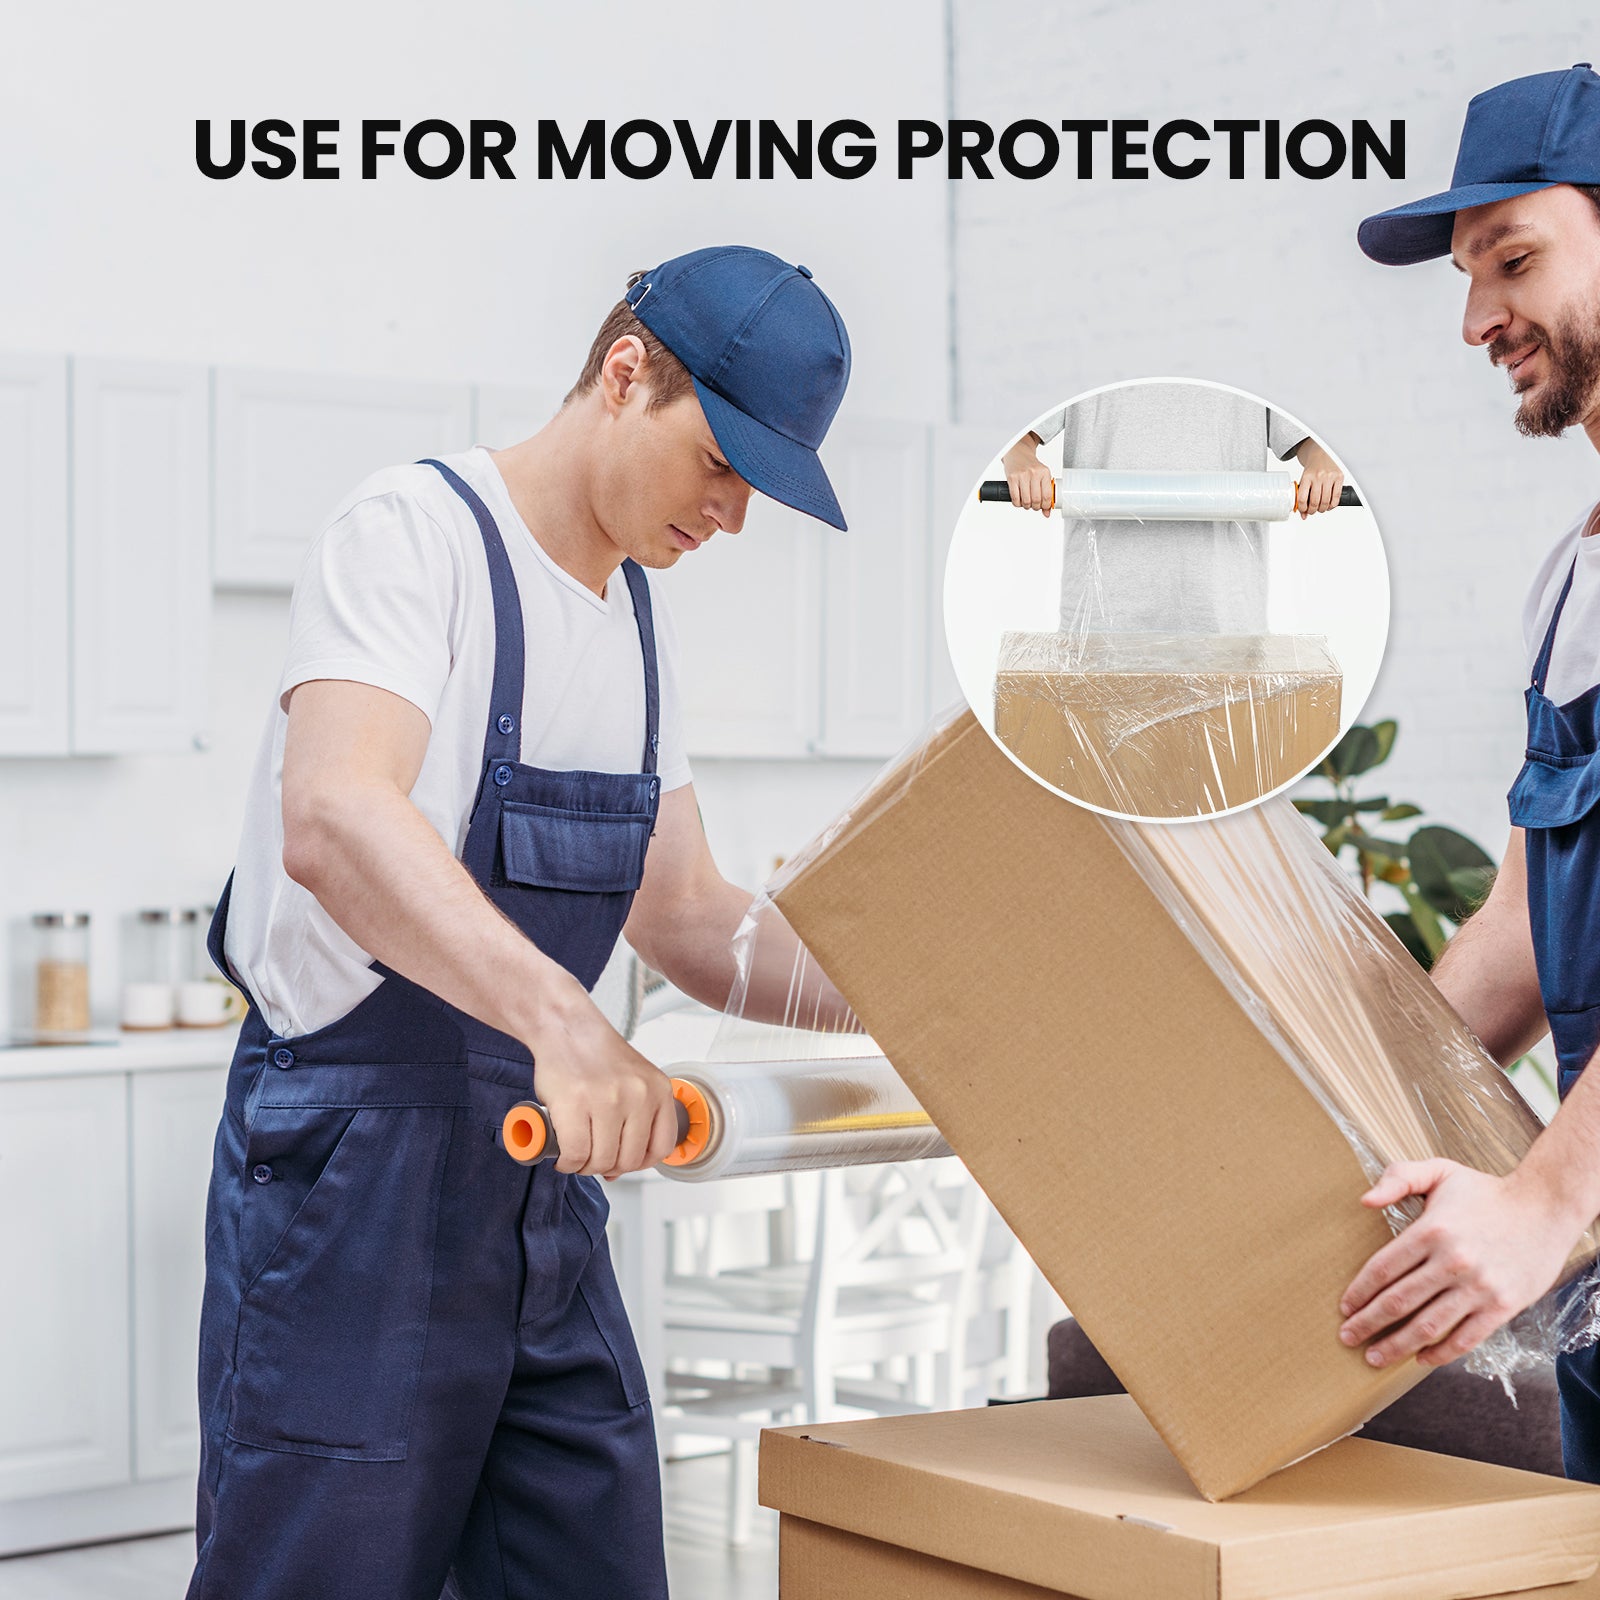 MUNBYN stretch film is truly an essential tool in any packing, shipping, or moving process.